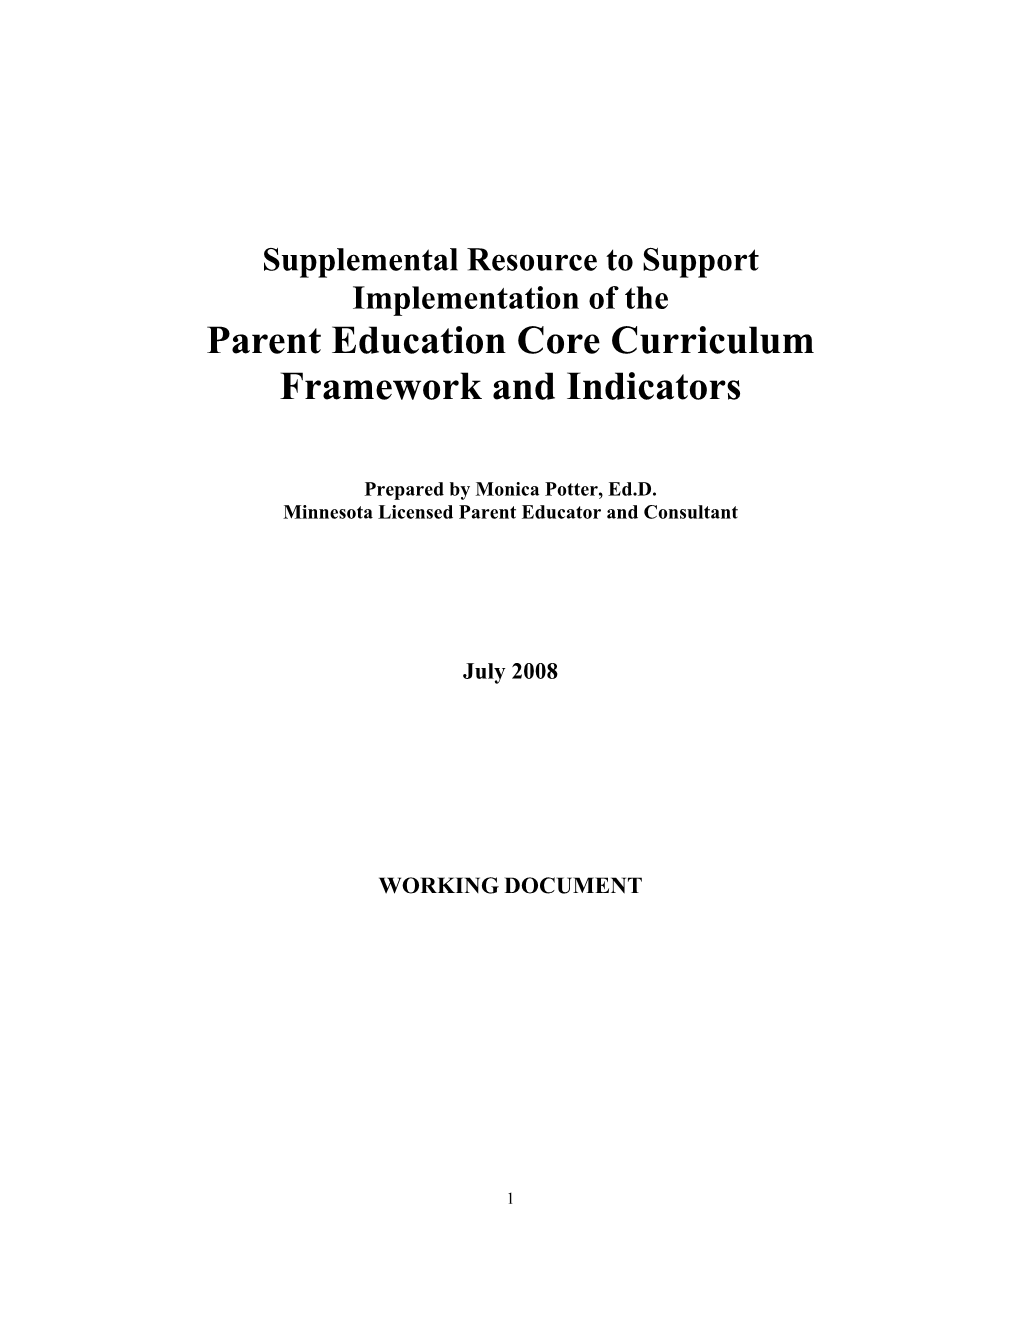 Supplemental Resource to Support Parent Education Core Curriculum Framework and Indicators